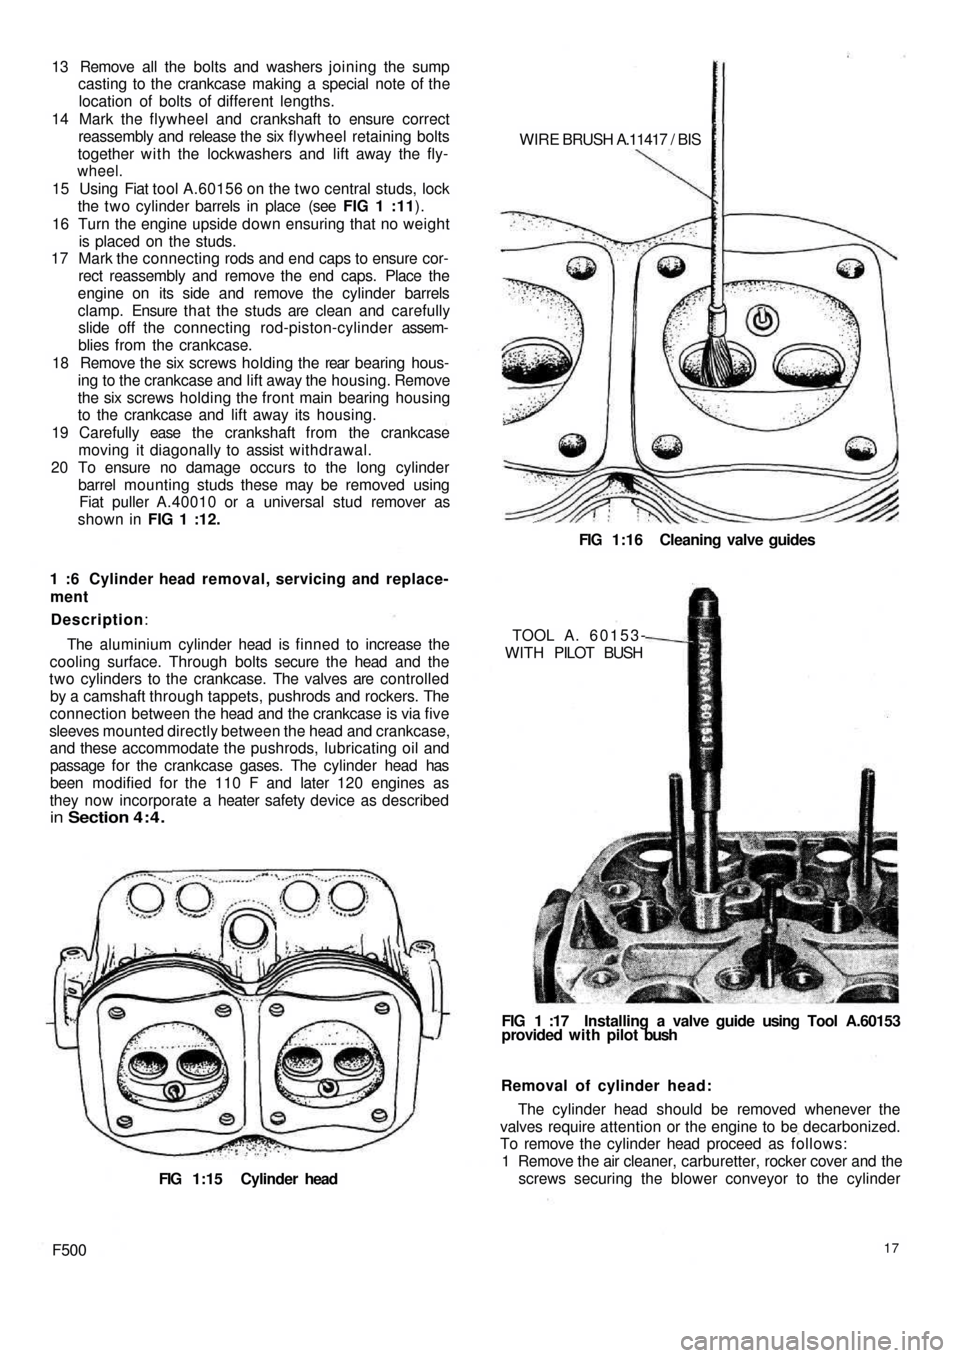 FIAT 500 1970 1.G Workshop Manual 13  Remove all the bolts and washers joining the sump
casting to the crankcase making a special note of the
location of bolts of different lengths.
14 Mark the flywheel and crankshaft to ensure correc